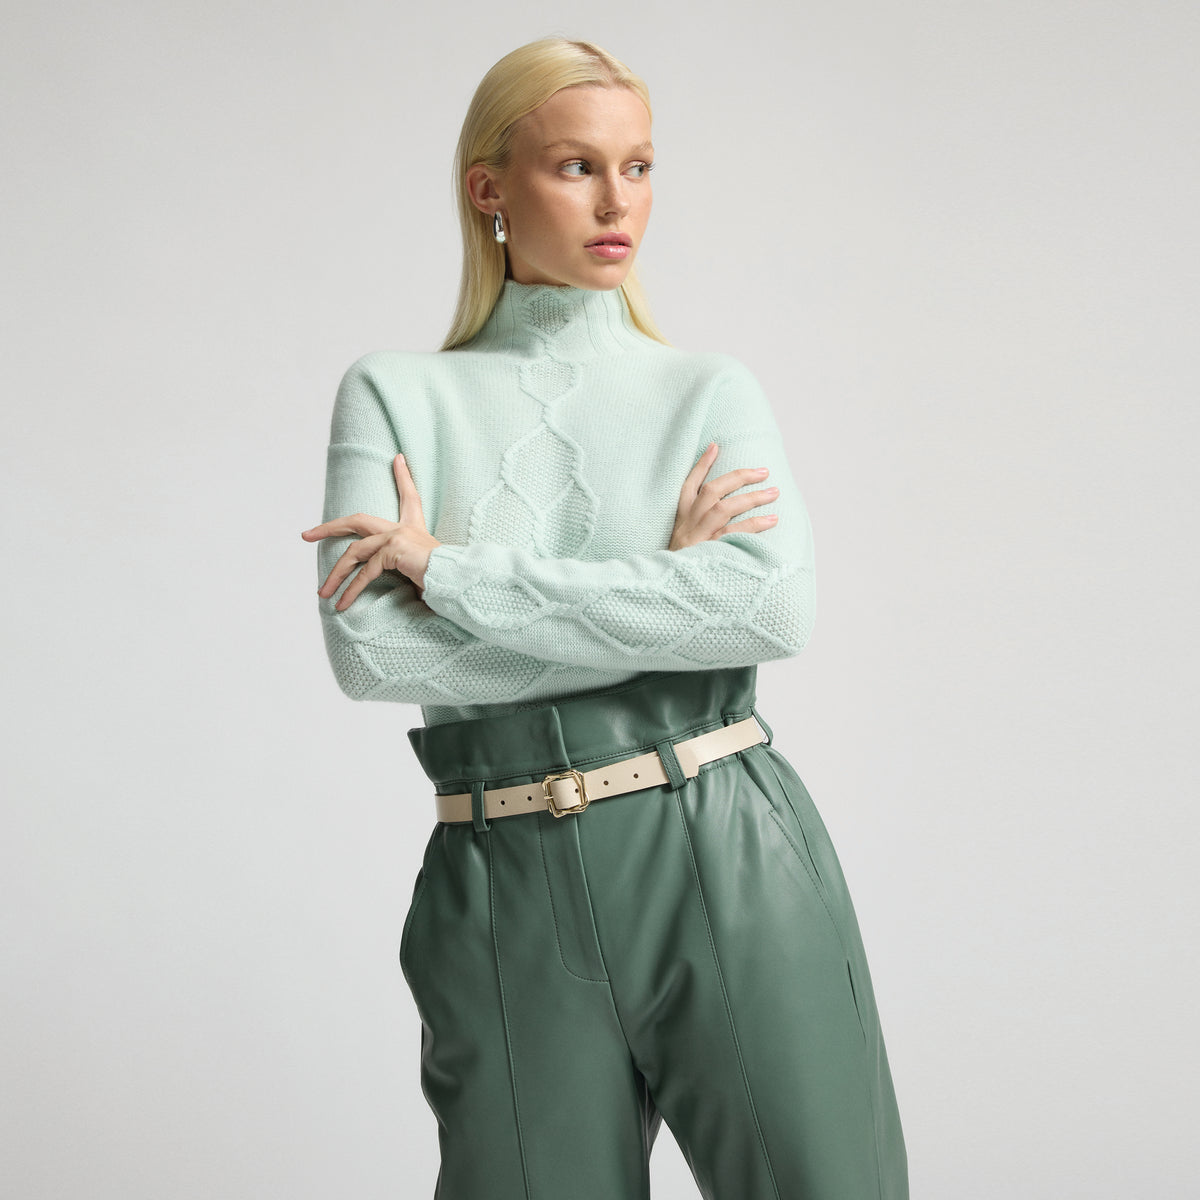 Cadence Leather Trouser - Sage